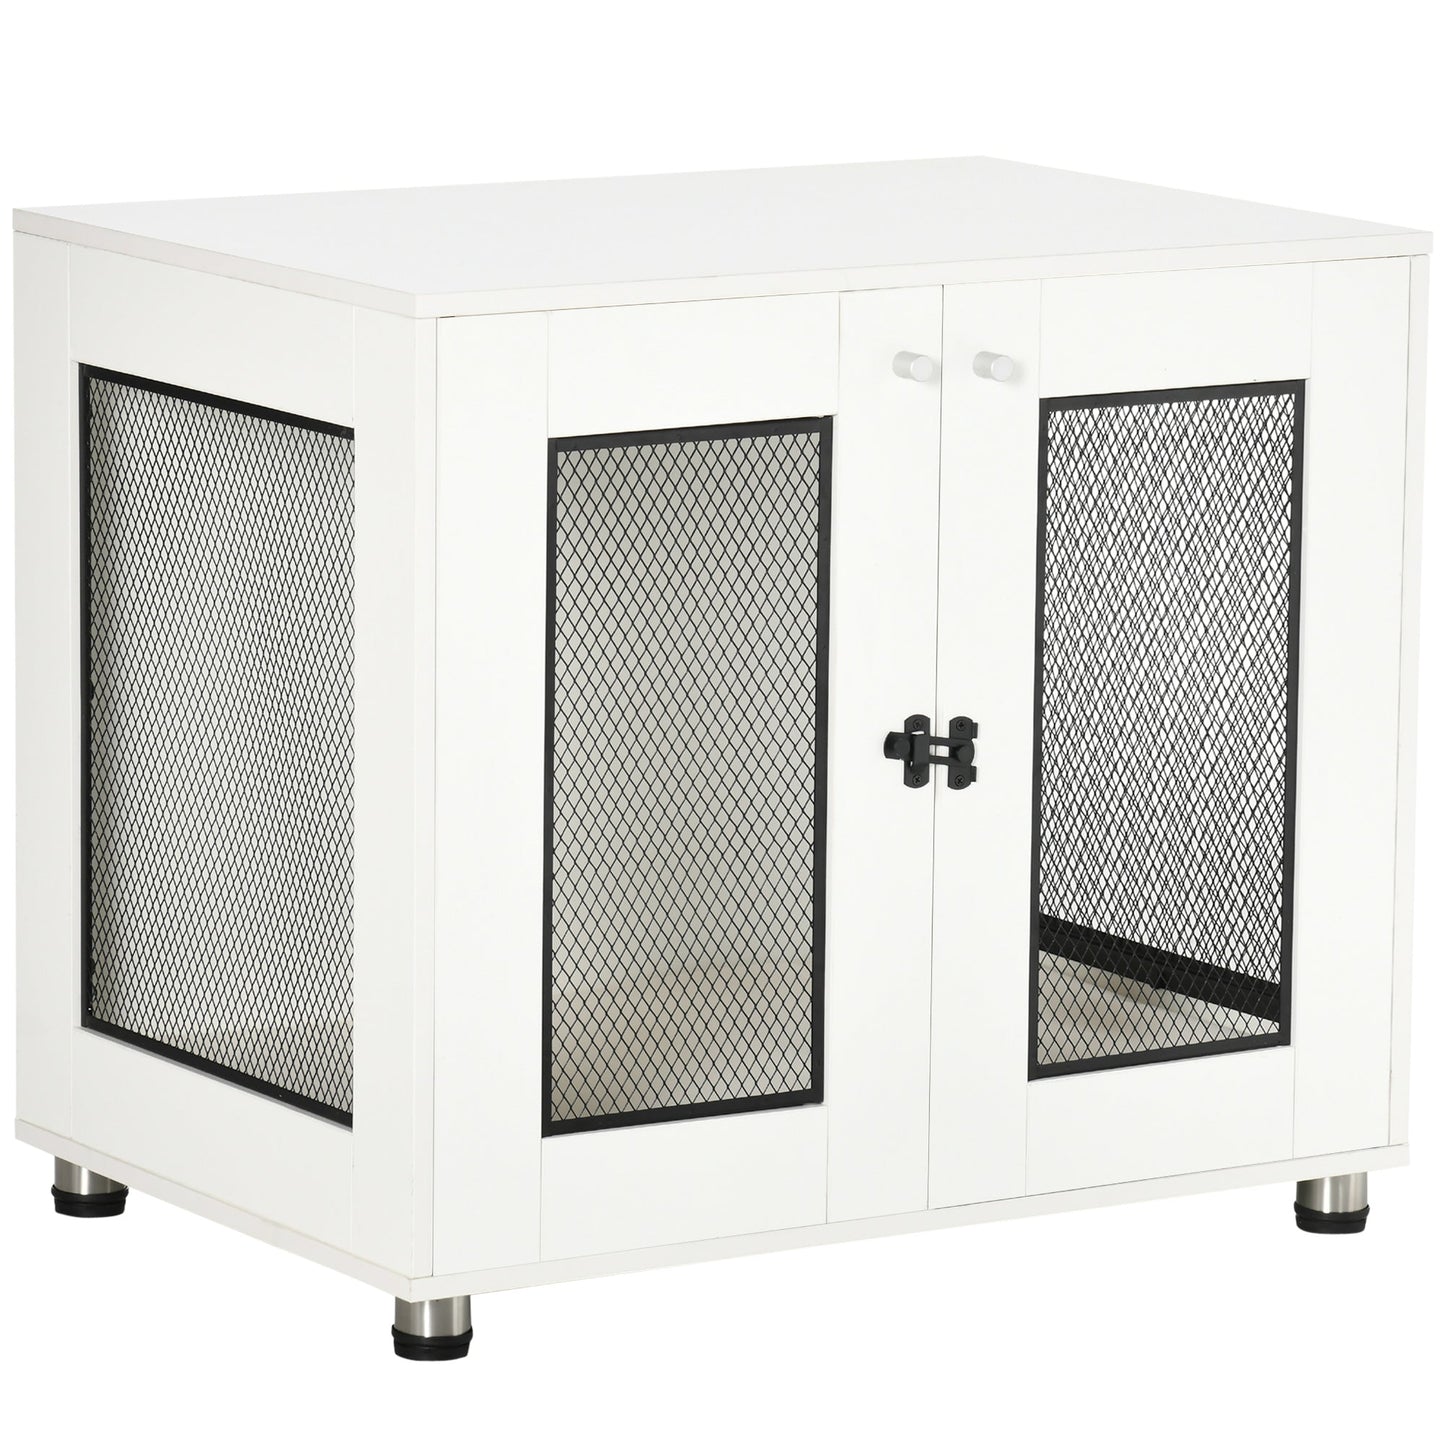 Pet Supplies-Dog Crate End Table with Water-resistant Cushion, Dog Cage End Table with Double Doors, Indoor Pet Crate for Small Medium Dogs, White - Outdoor Style Company